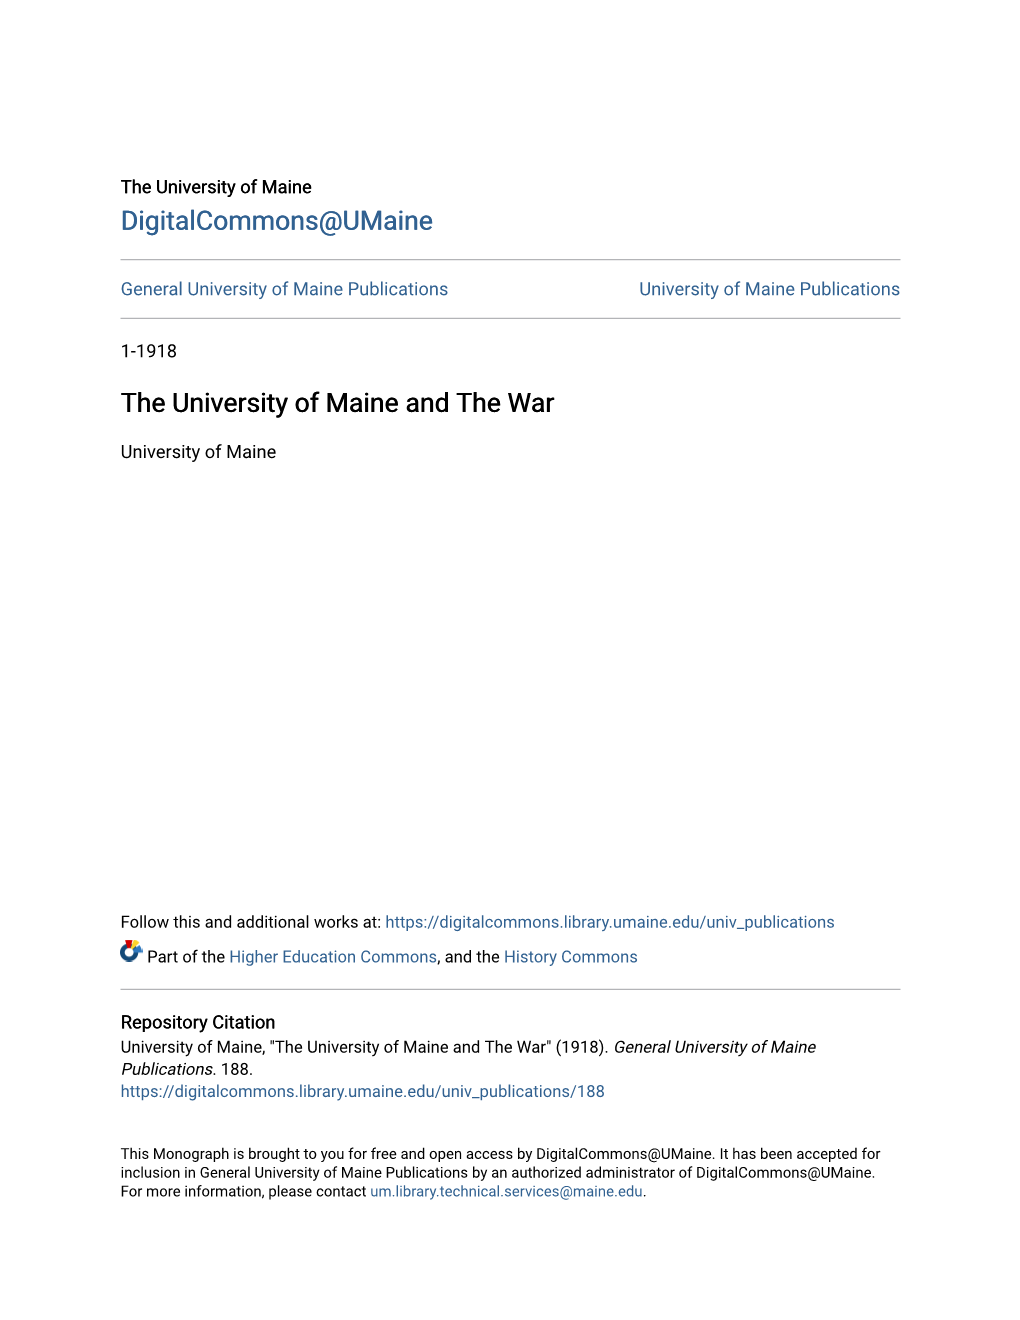 The University of Maine and the War